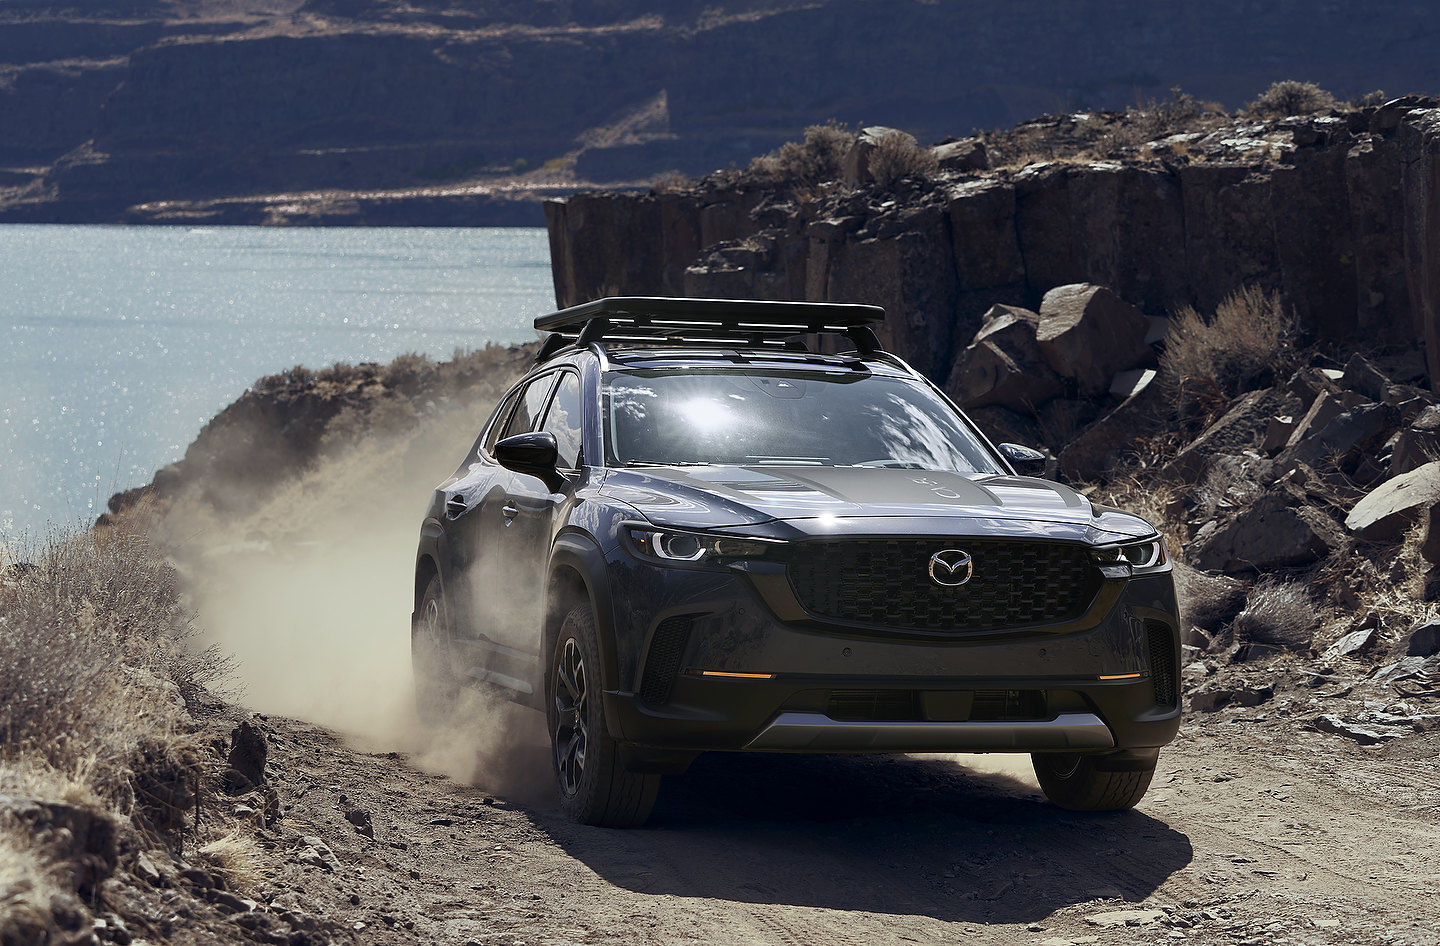 The 2023 Mazda CX-50 is Offered with two engines. Here are some details about each